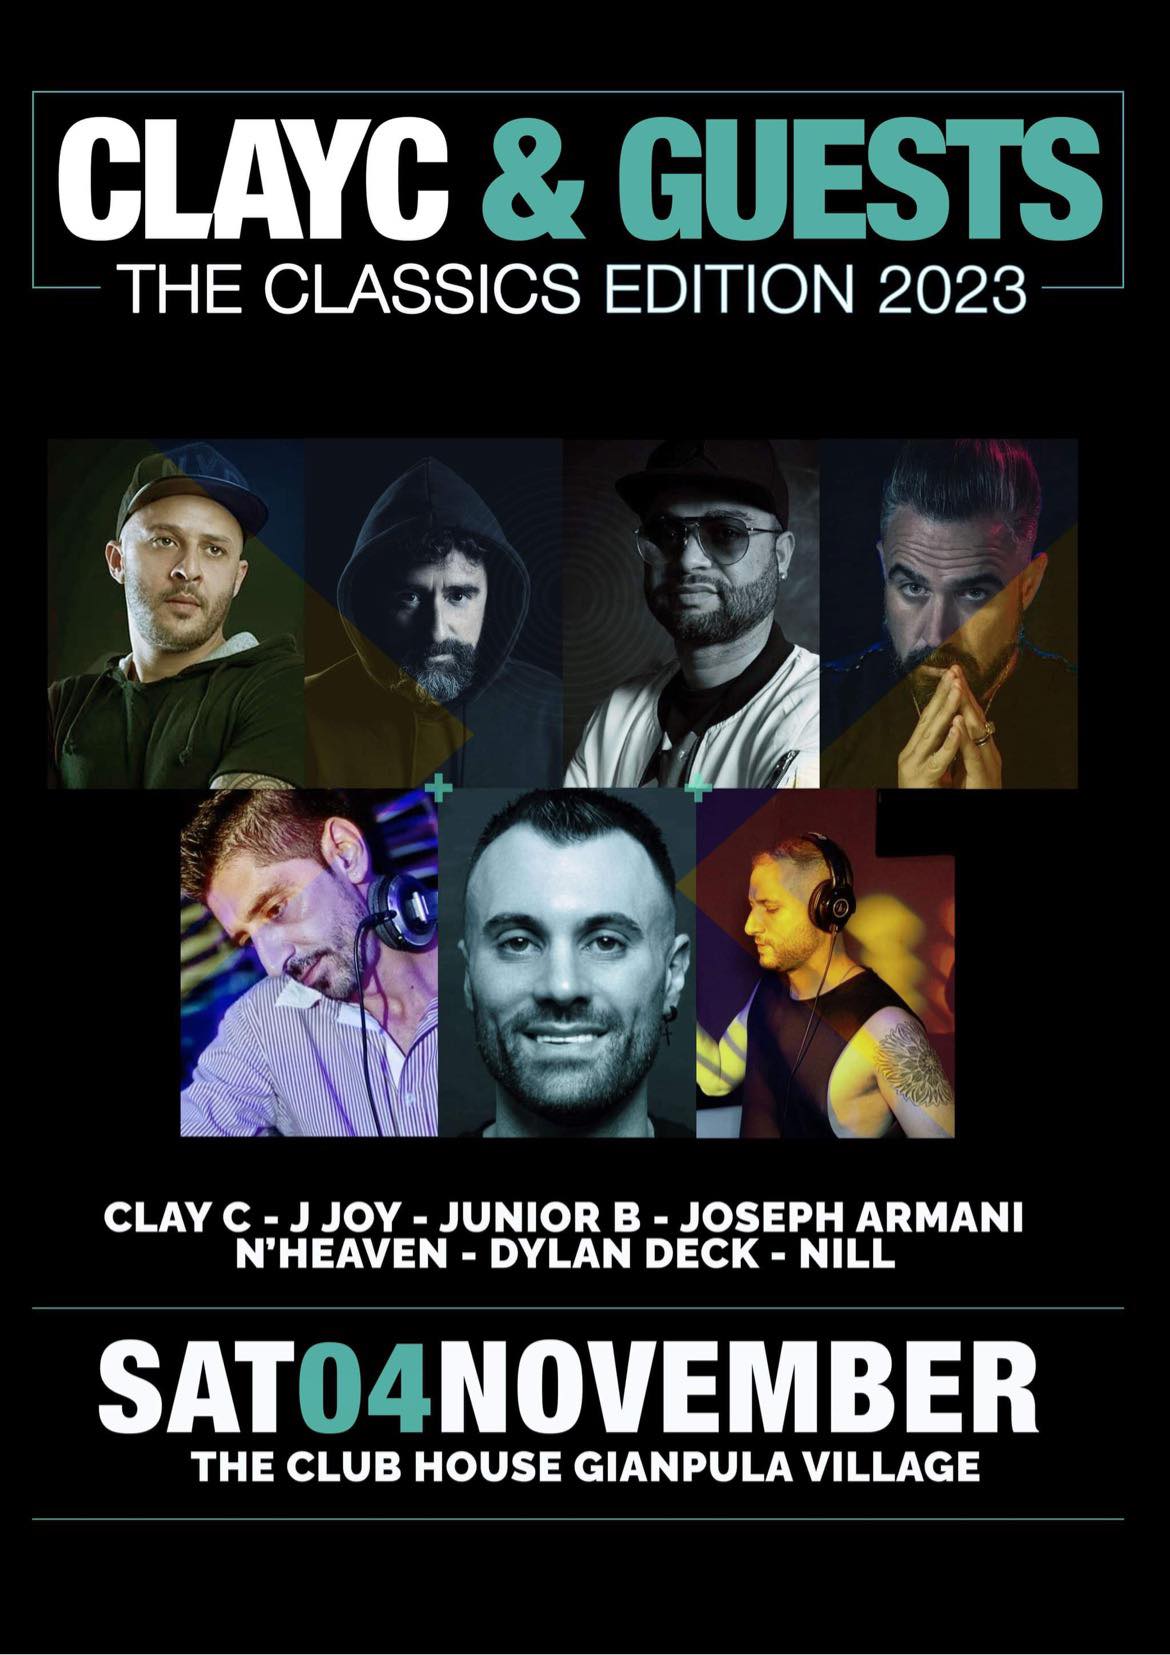 Clay C & Guests - The Classics Edition 2023 poster